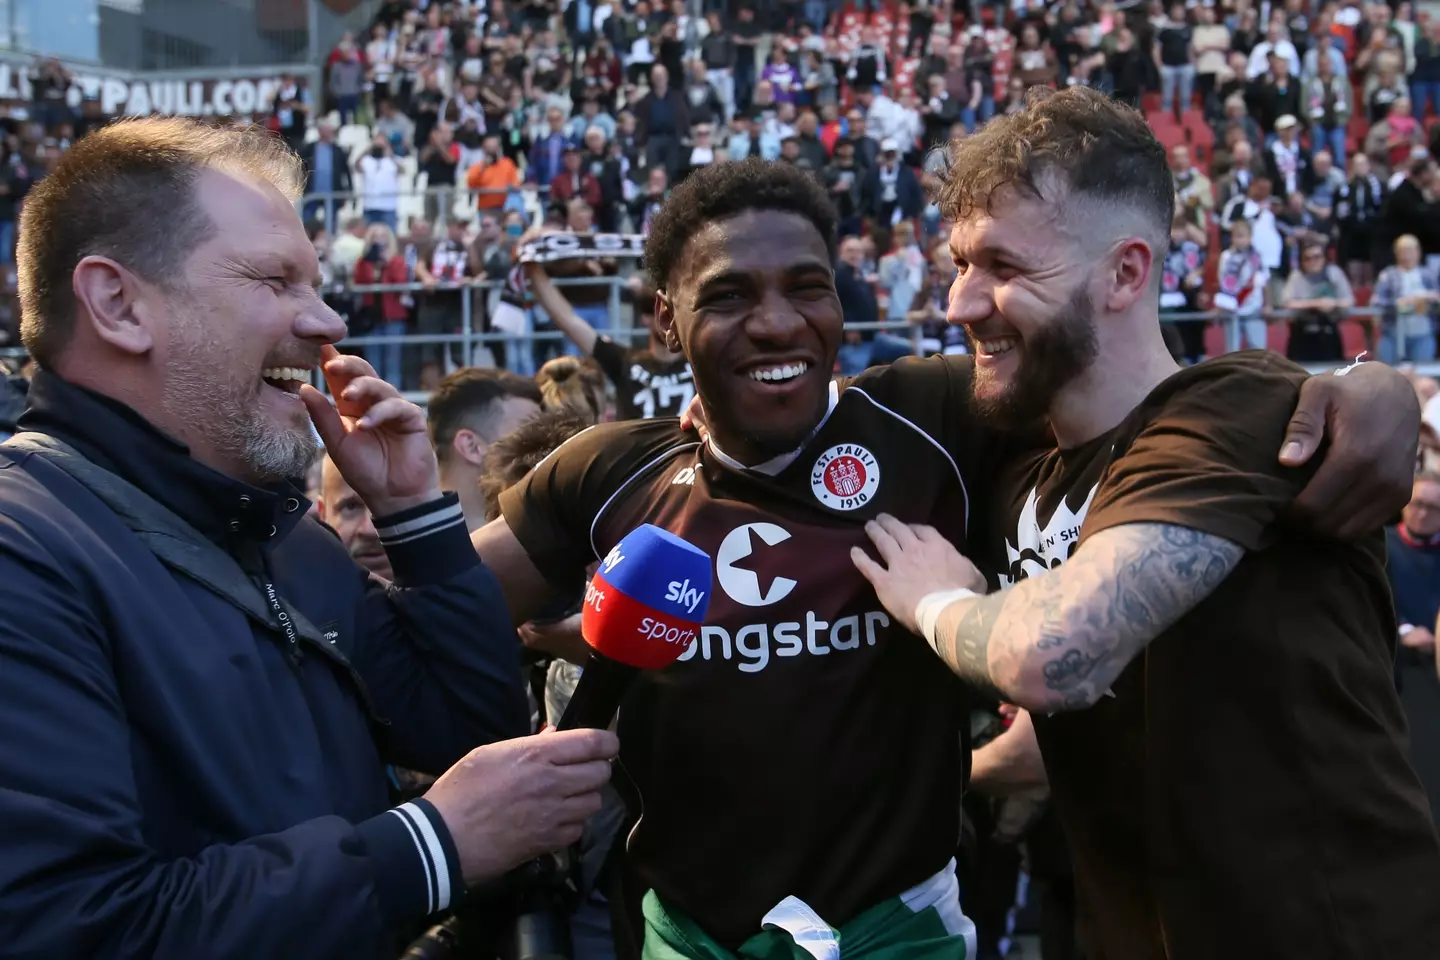 Afolayan's brace against VfL Osnabruck secured promotion to the Bundesliga. [Getty]